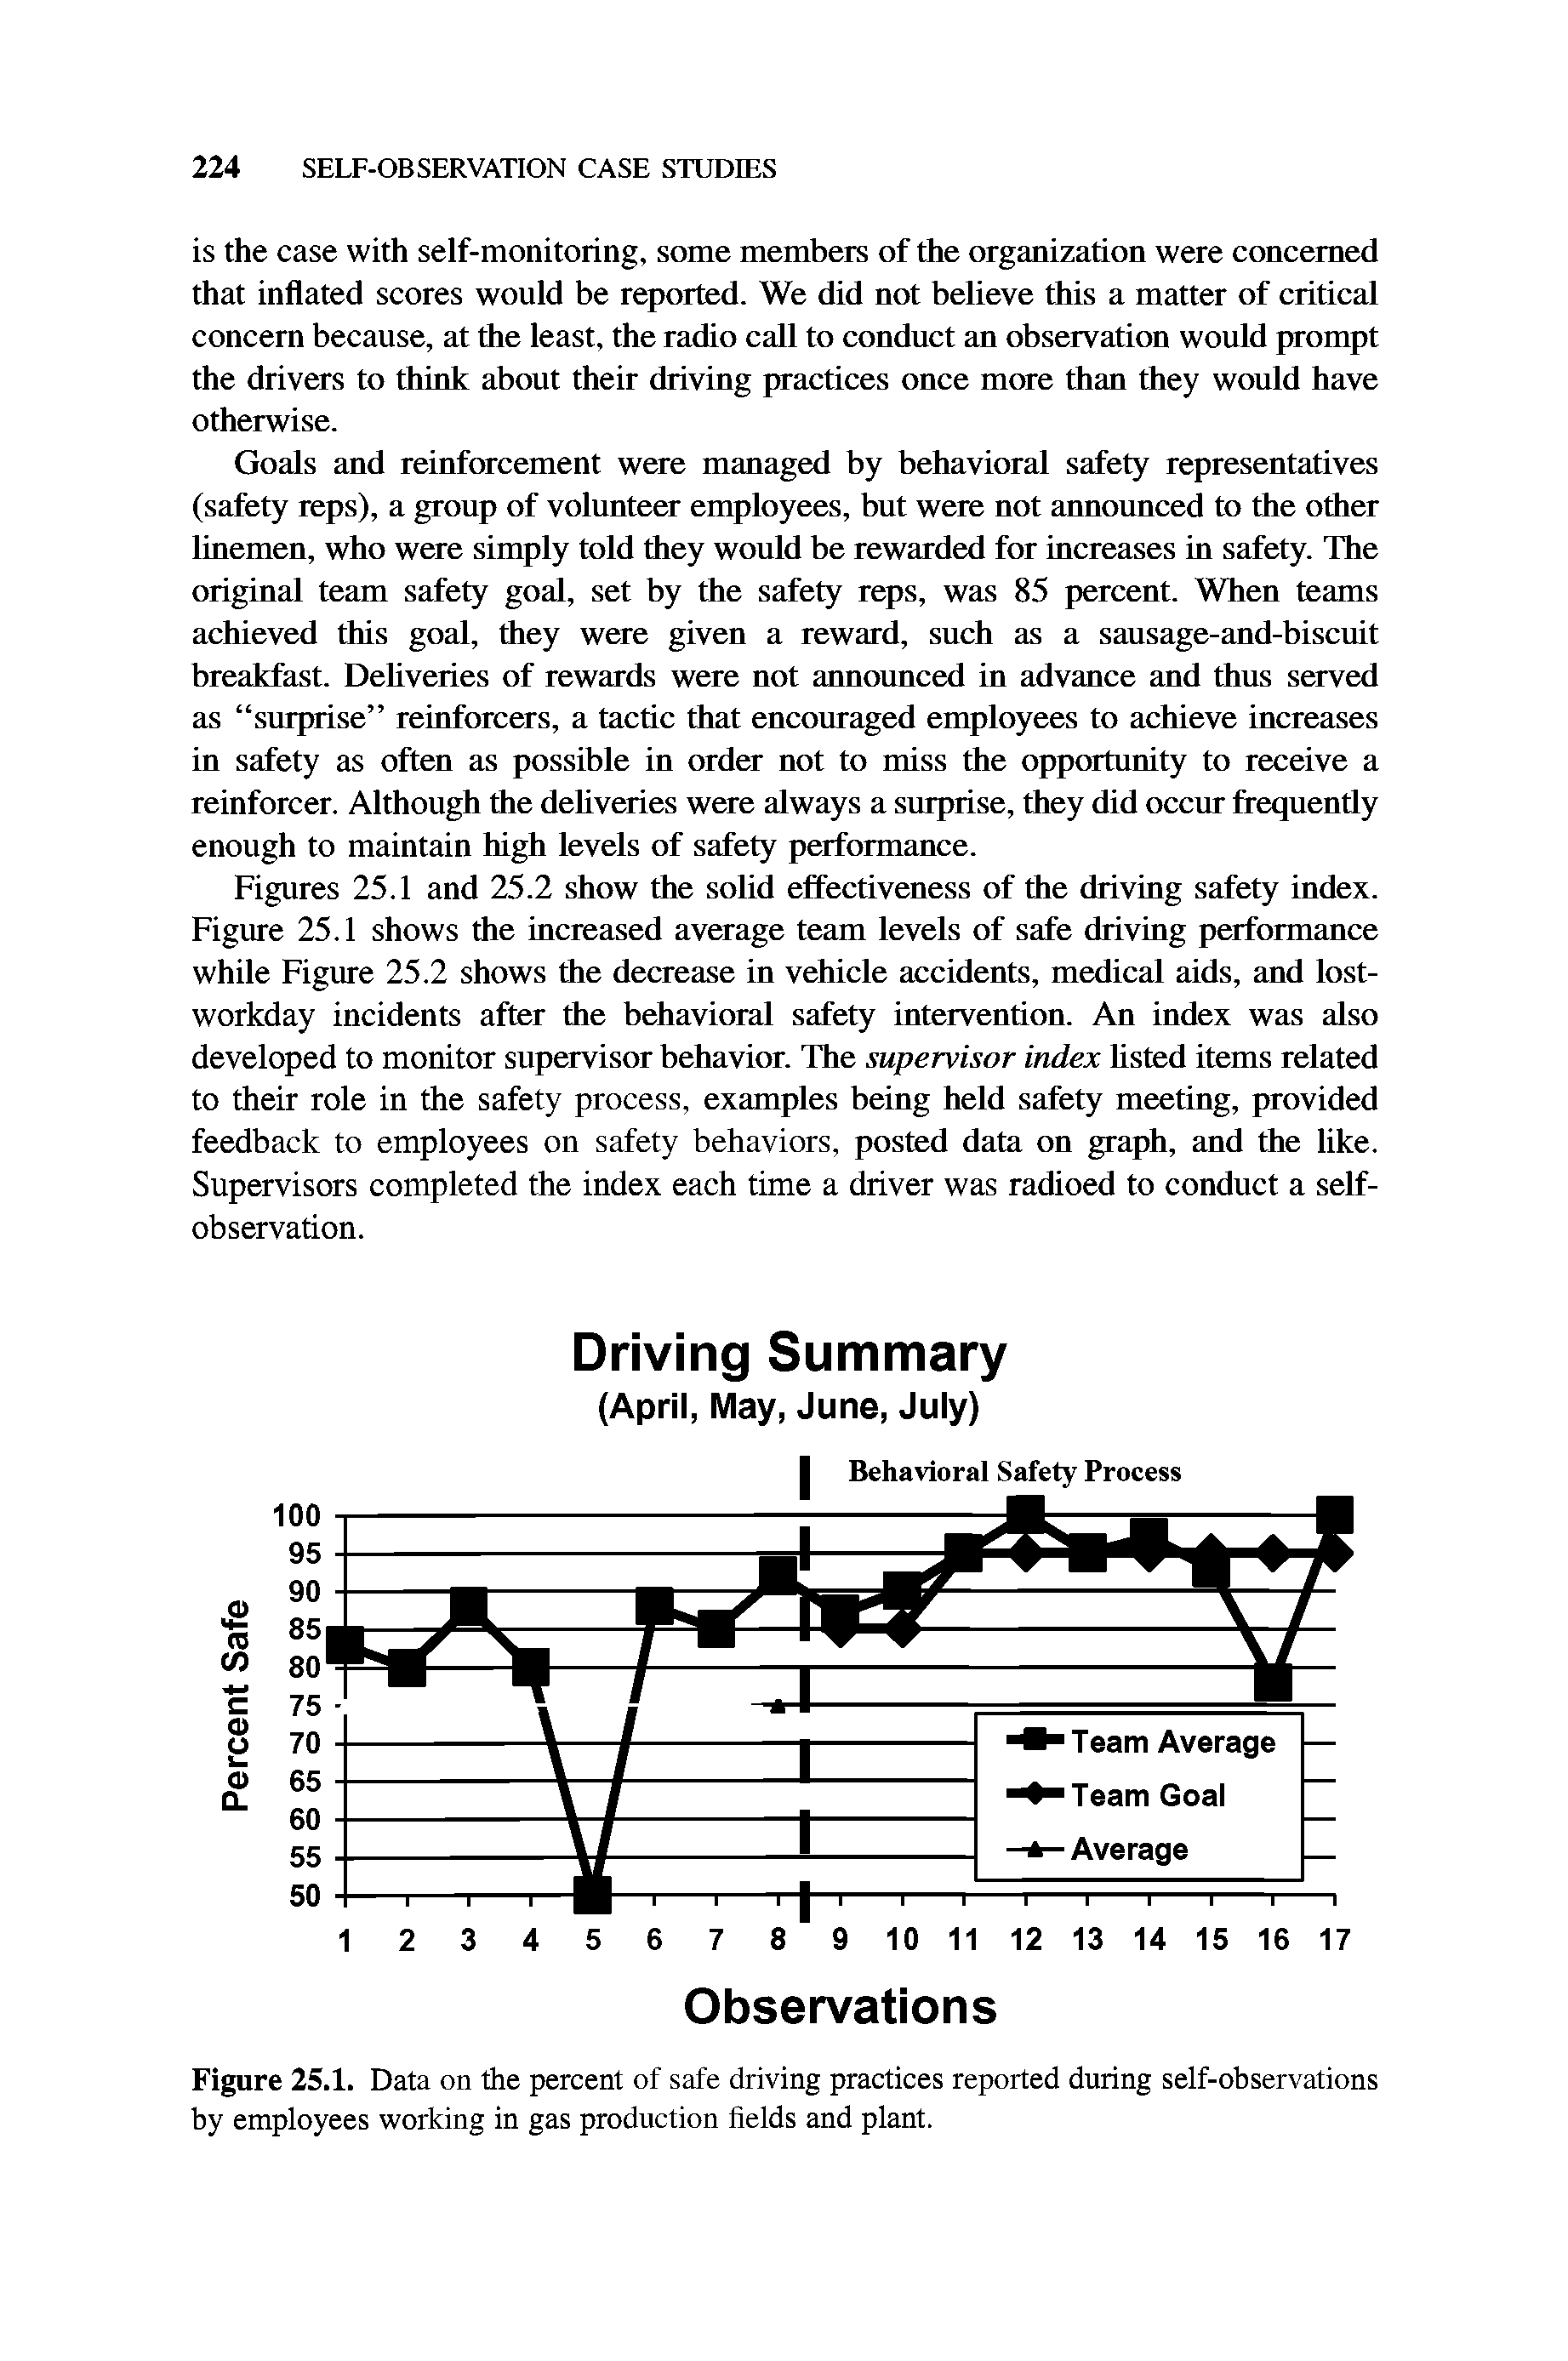 Figures 25.1 and 25.2 show the solid effectiveness of the driving safety index. Figure 25.1 shows the increased average team levels of safe driving performance while Figure 25.2 shows the decrease in vehicle accidents, medical aids, and lost-workday incidents after the behavioral safety intervention. An index was also developed to monitor supervisor behavior. The supervisor index listed items related to their role in the safety process, examples being held safety meeting, provided feedback to employees on safety behaviors, posted data on graph, and the like. Supervisors completed the index each time a driver was radioed to conduct a selfobservation.